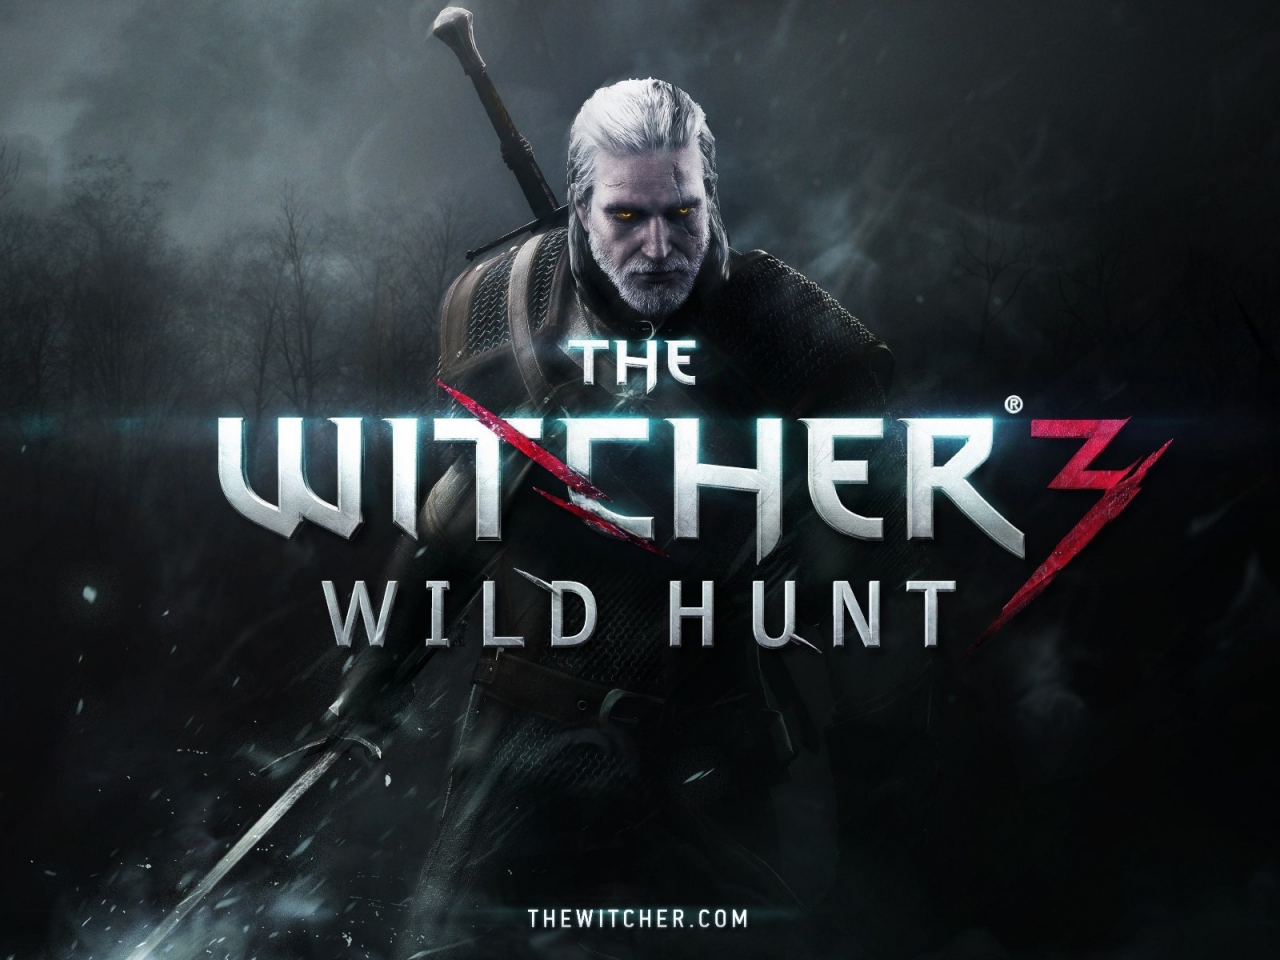 The Witcher 3 for 1280 x 960 resolution